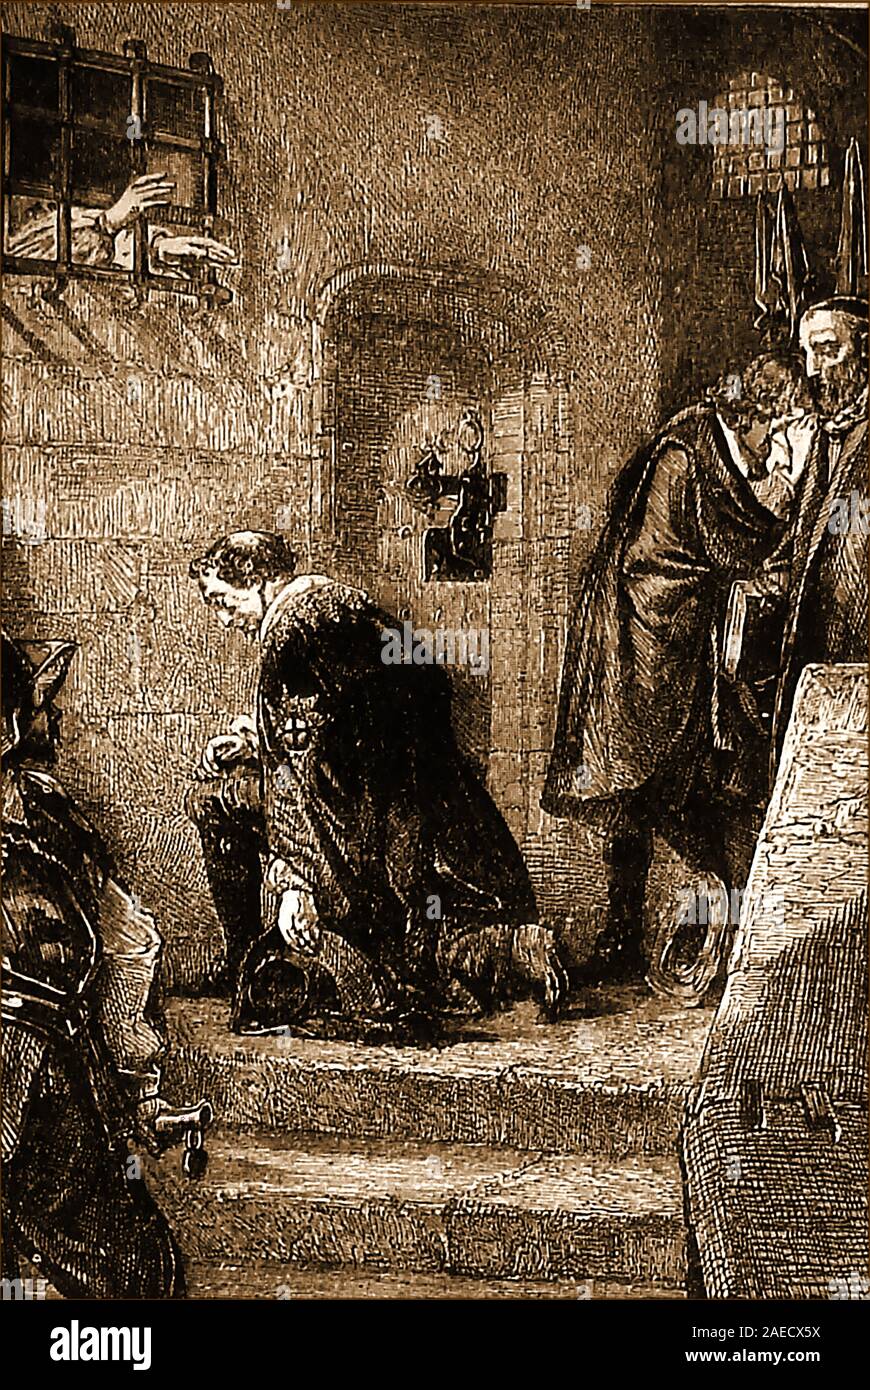 Edward Stafford,  (1478 – 17 May 1521), the  3rd duke of Buckingham, was beheaded on Tower Hill outside the Tower of London, after being  found guilty of high treason against Henry VIII, his  first cousin once removed .This old illustration shows him praying in gaol immediately before execution reciting the 'penitential psalms'. He was 43. Stock Photo